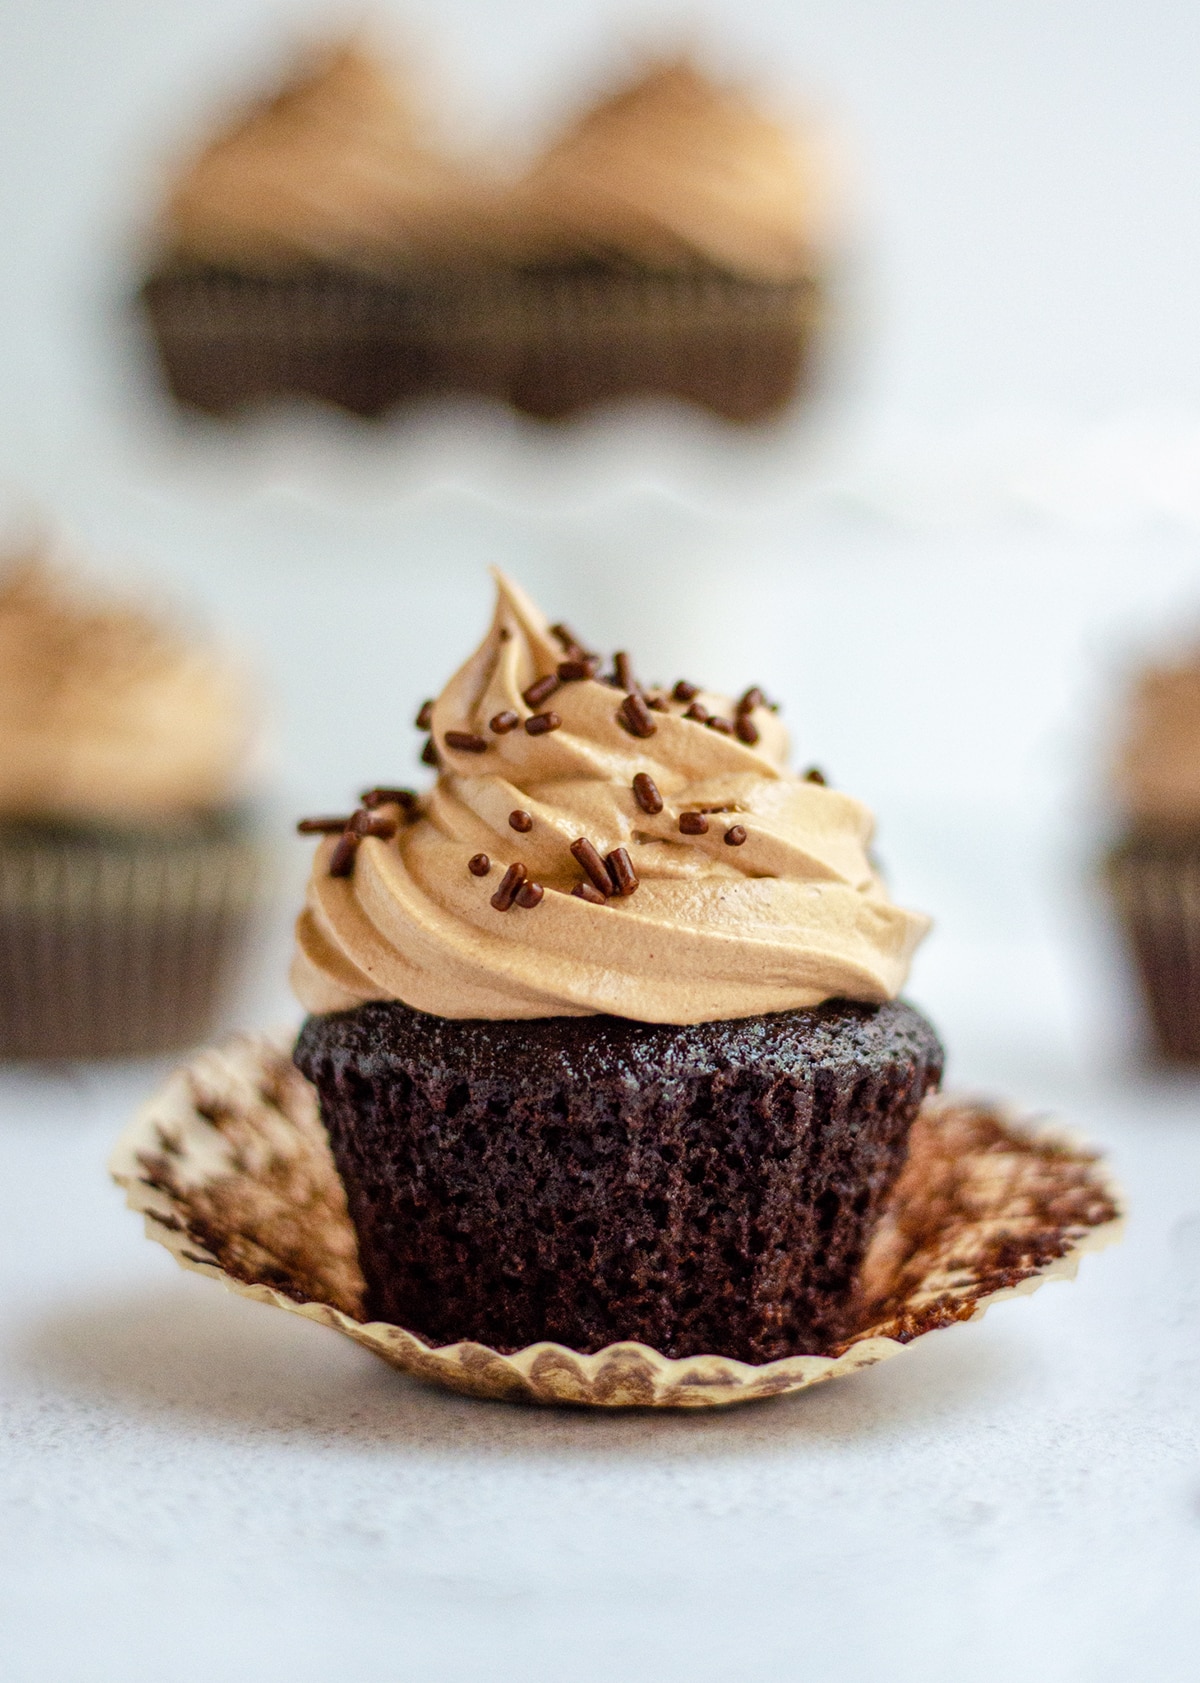 an unwrapped simple chocolate cupcakes with chocolate swiss meringue buttercream and chocolate sprinkles on top